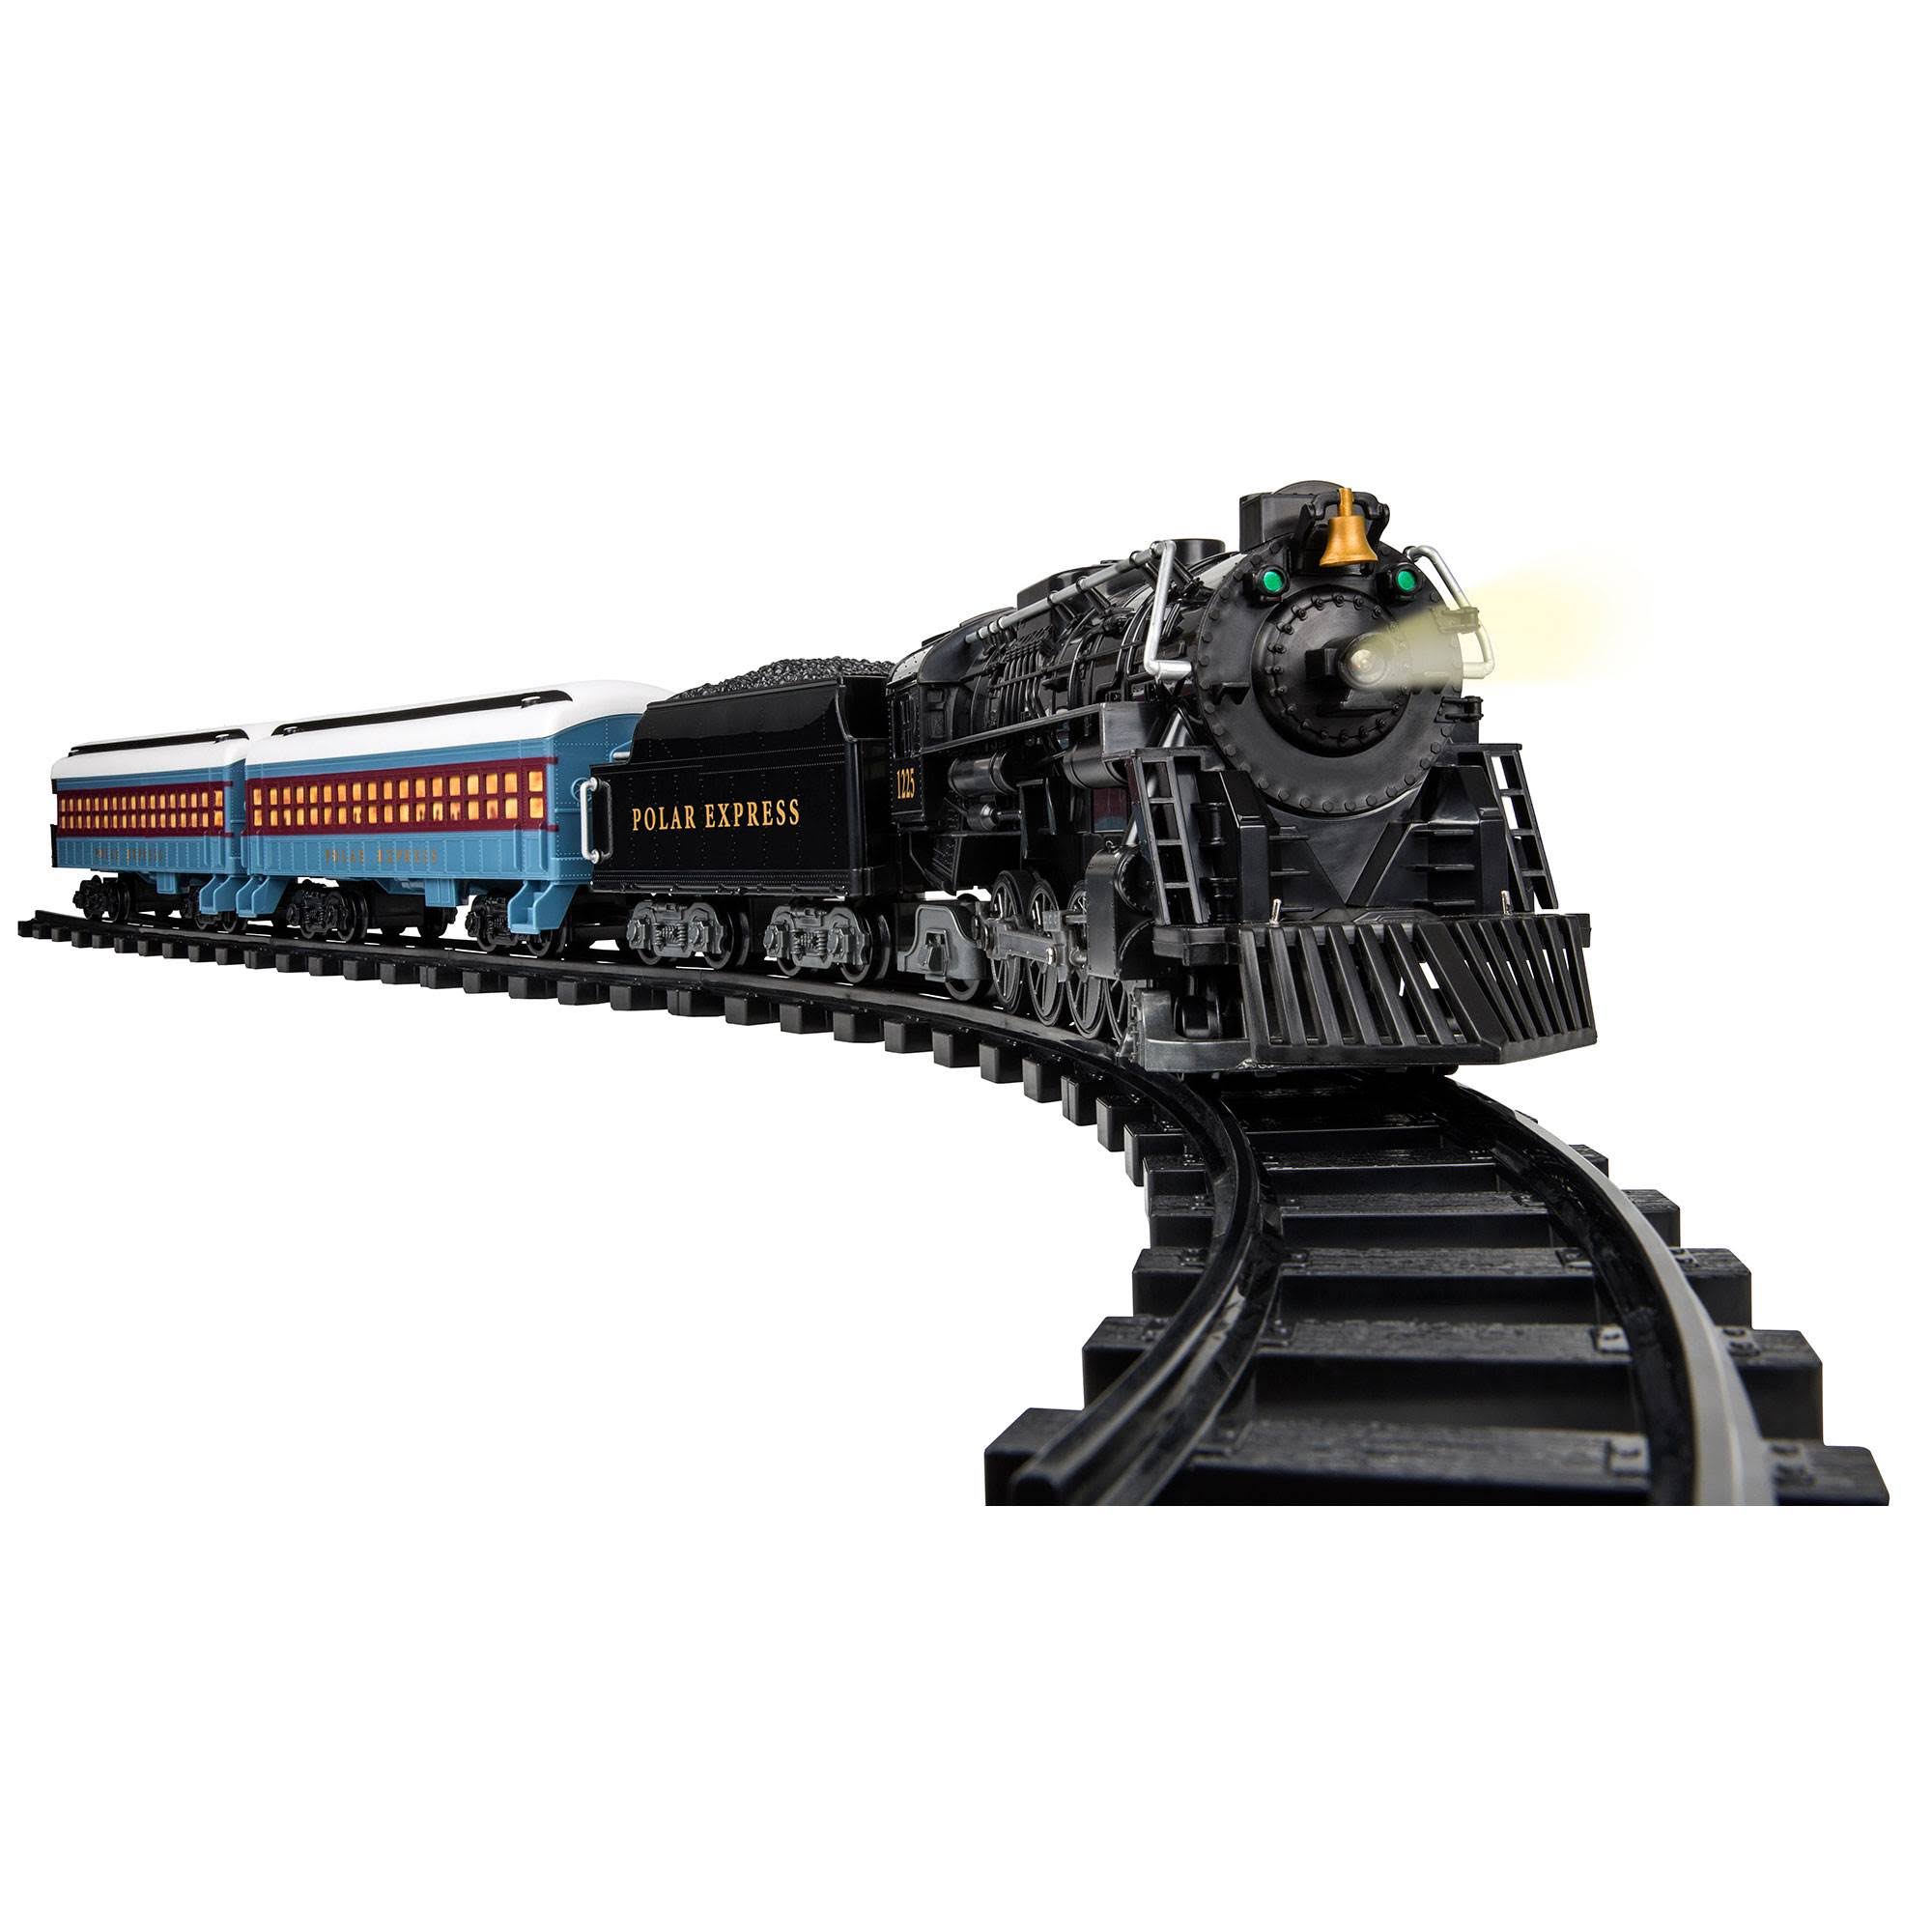 Lionel 7-11803 The Polar Express Ready-to-Play Train Set